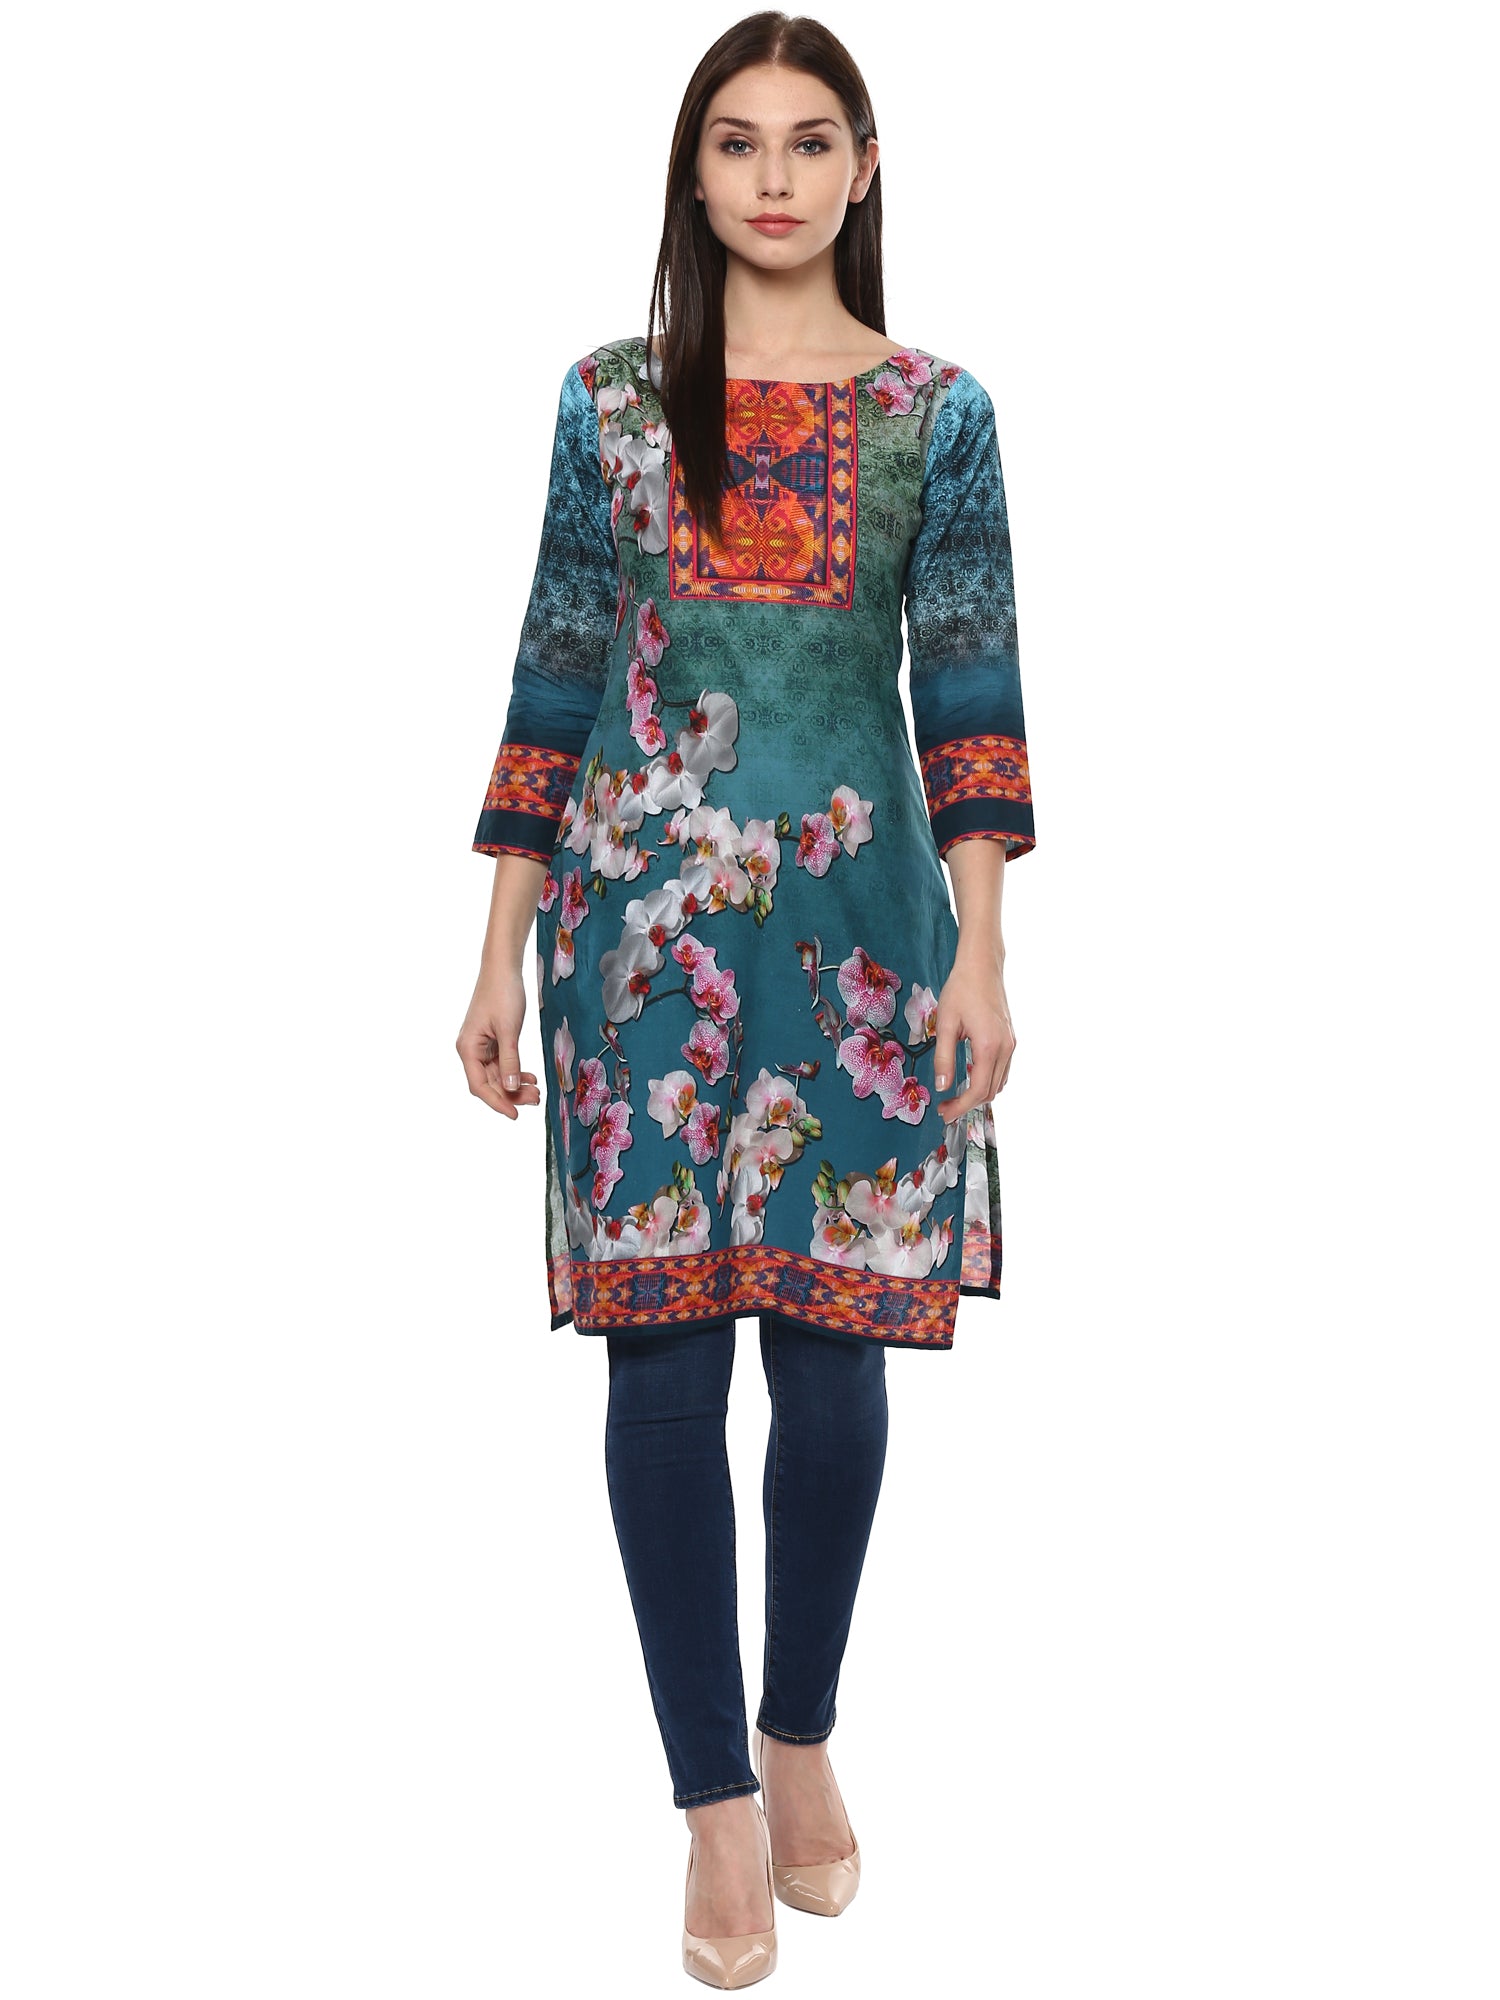 Women's Shades Of Blue Pakistani Style Floral Cotton Only Kurti - Ahalyaa